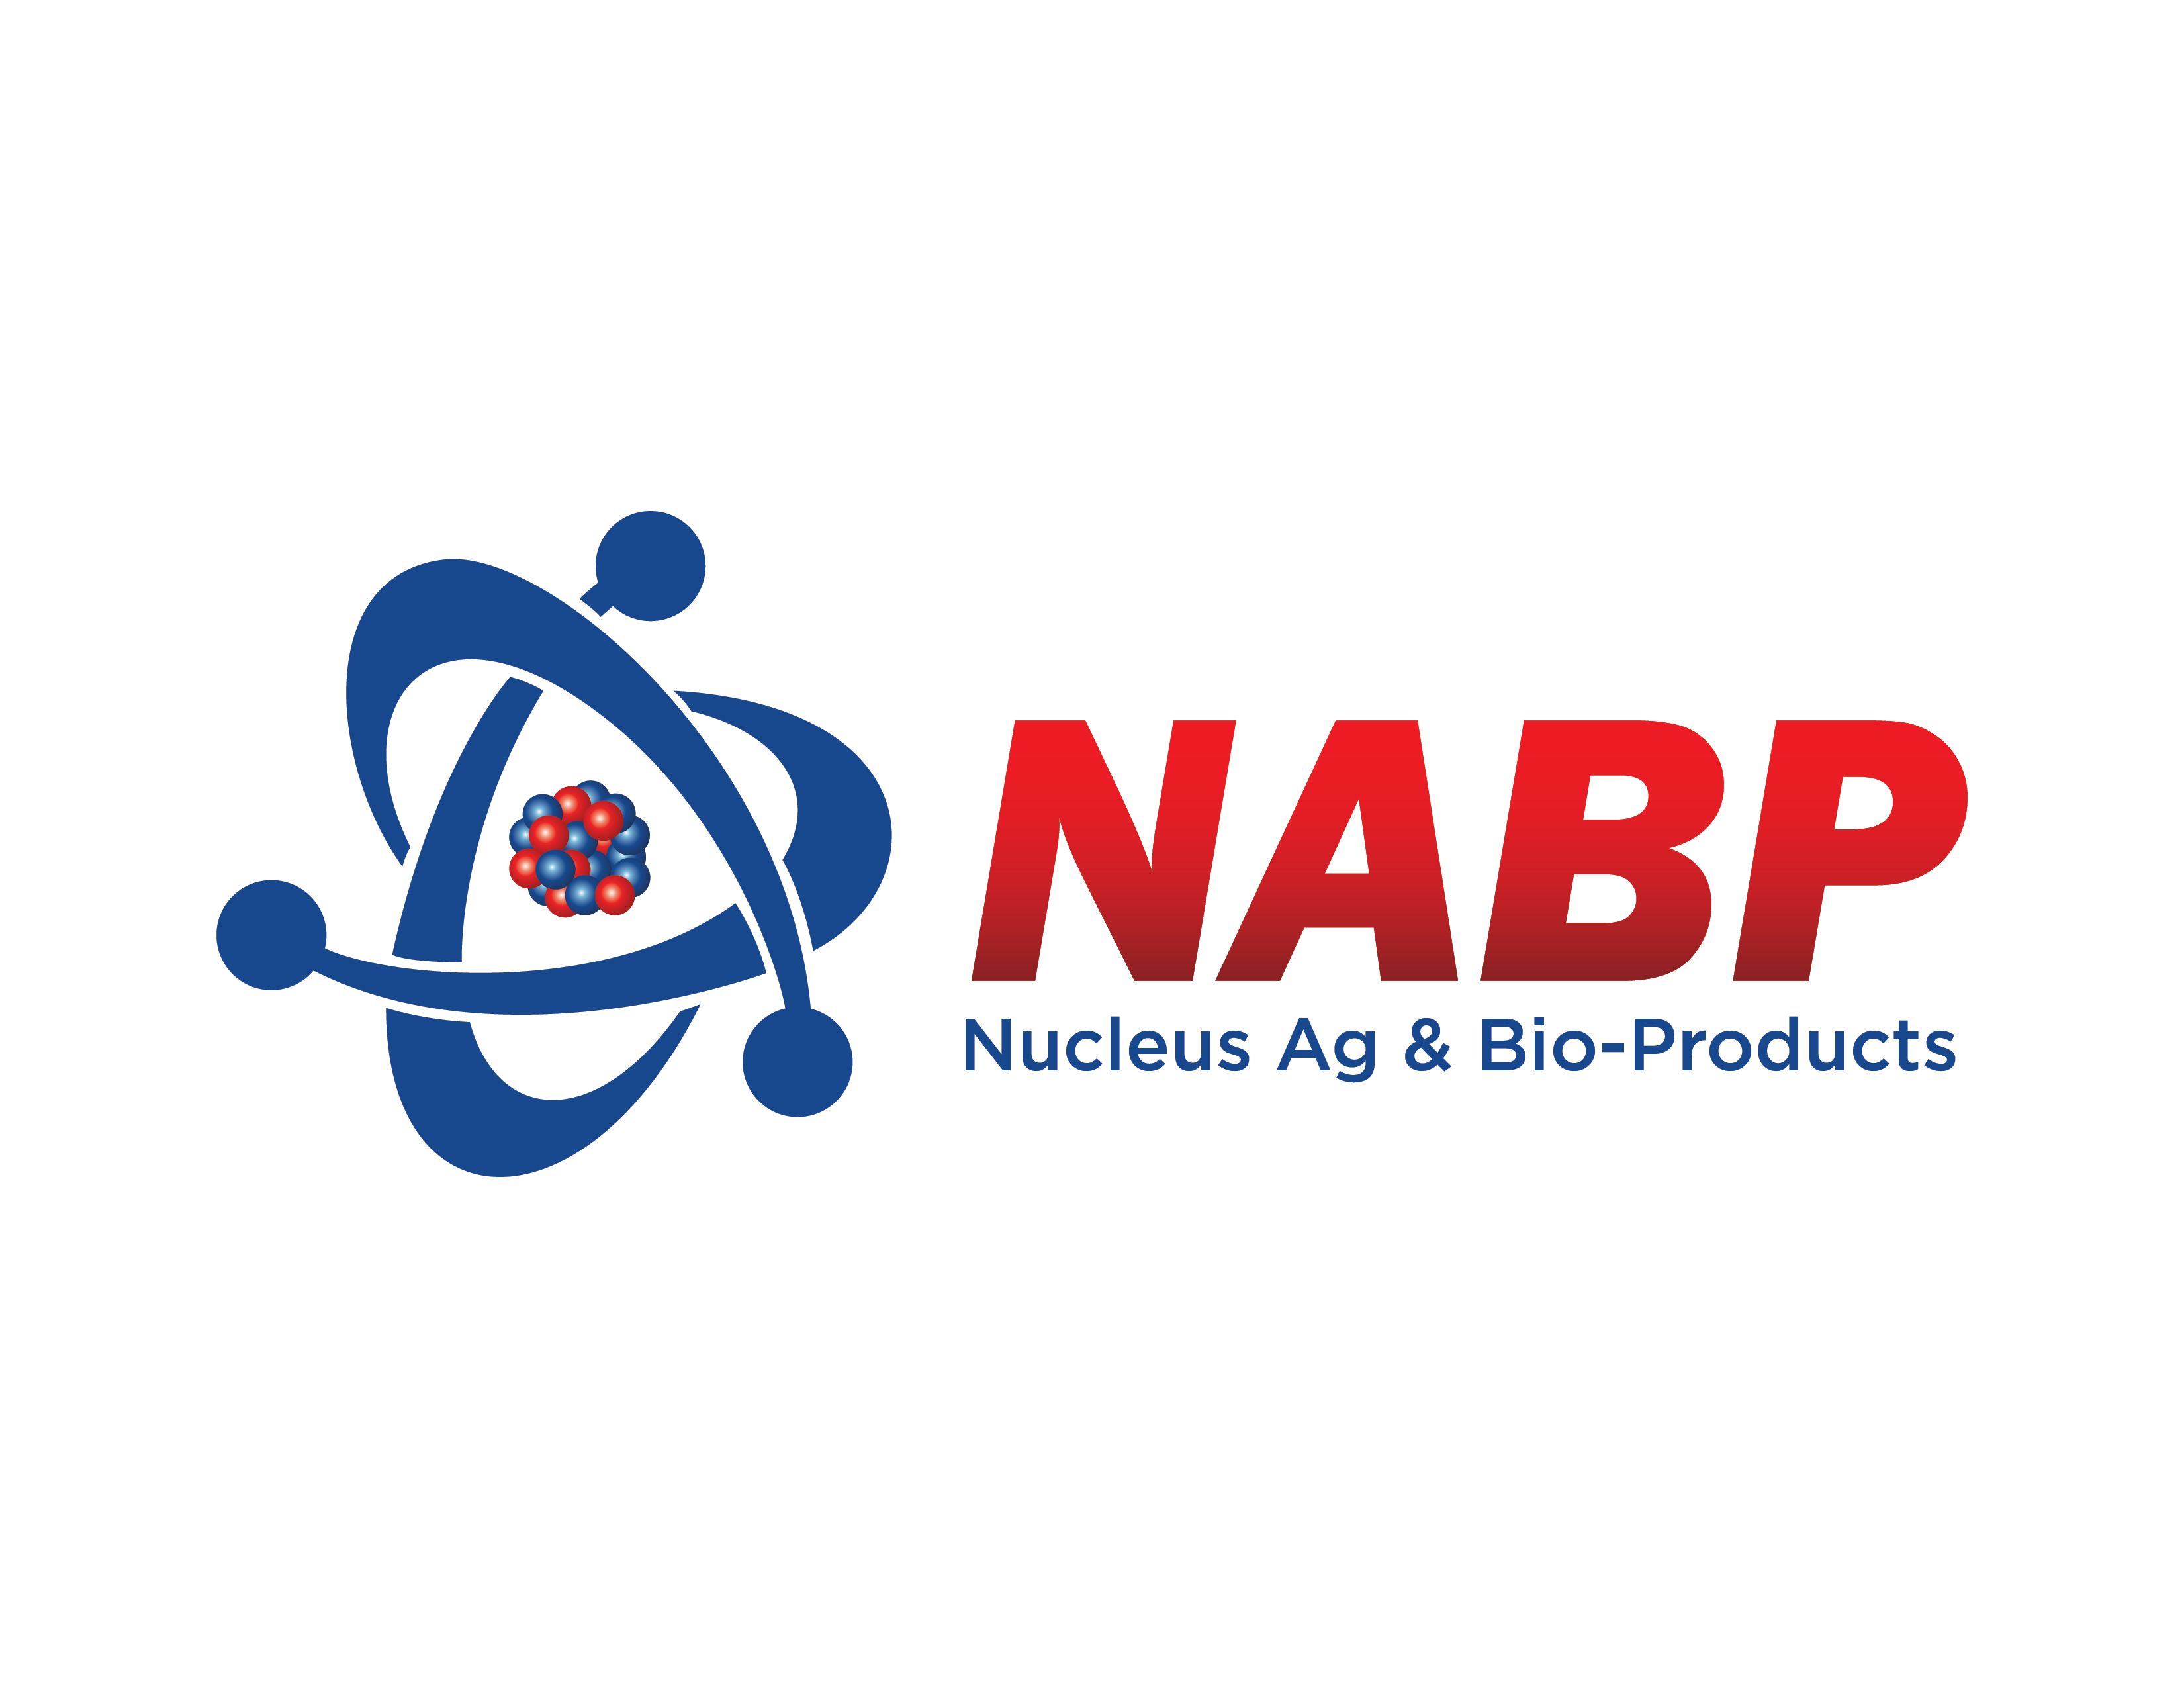 NABP (Nucleaus Ag & Bio Products)